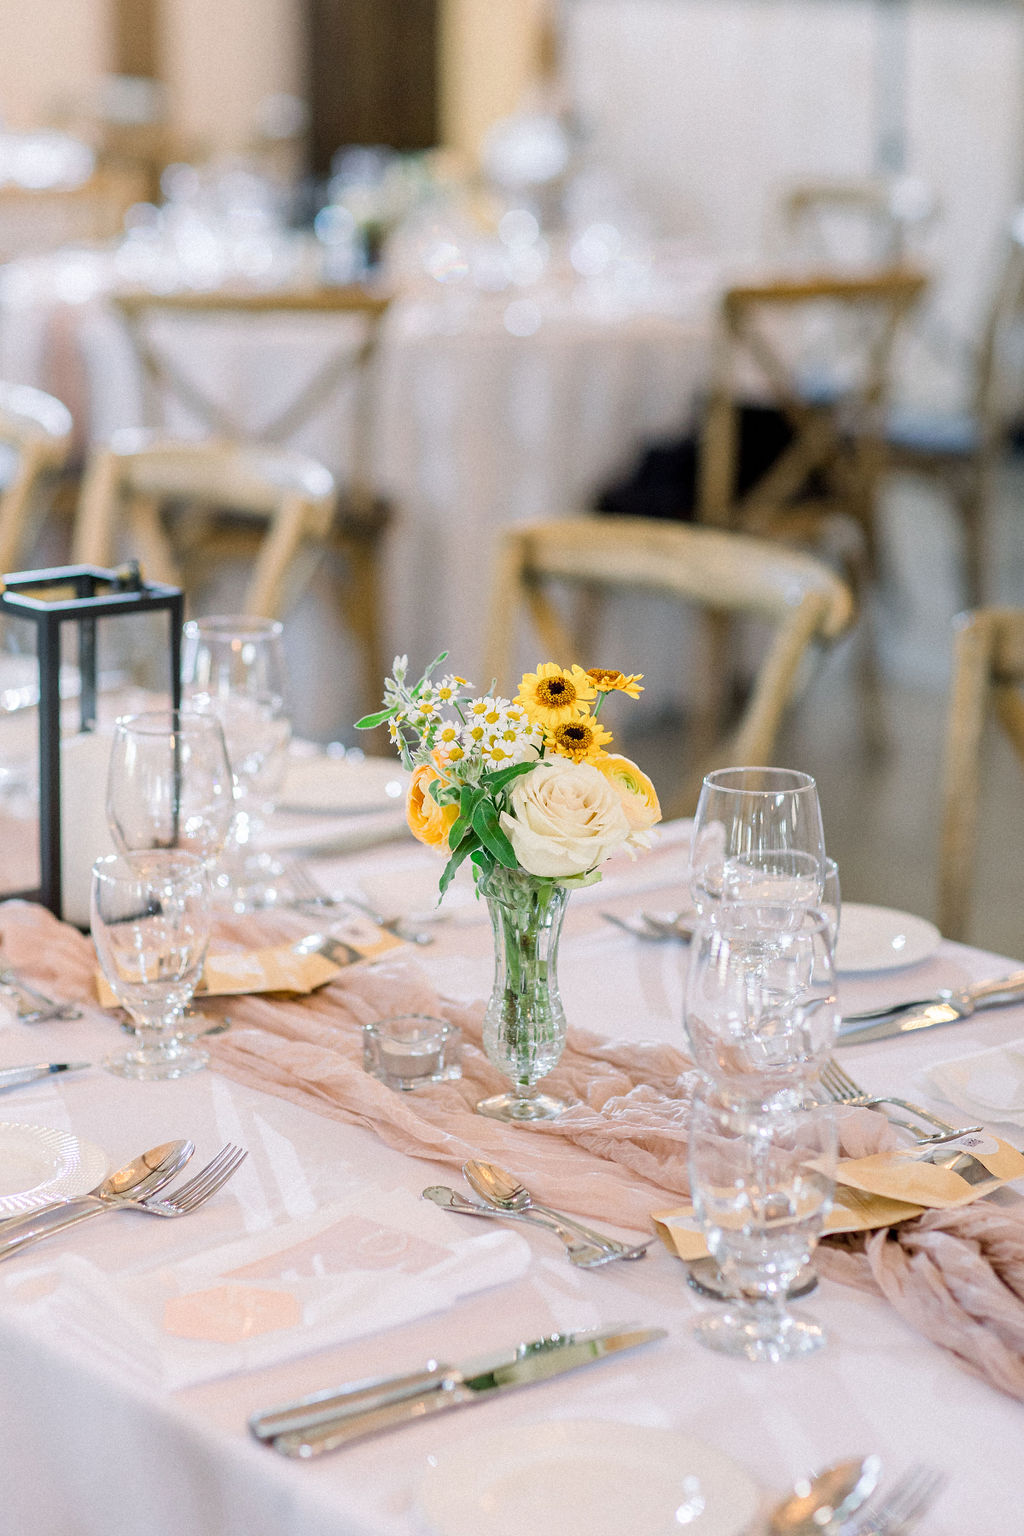 Floral Reef Designs Ottawa Wedding Florist - Amy Pinder Photography - Stonefields Estate wedding - close up on small bud vases on wedding reception dinner table holding warm toned pastel flowers